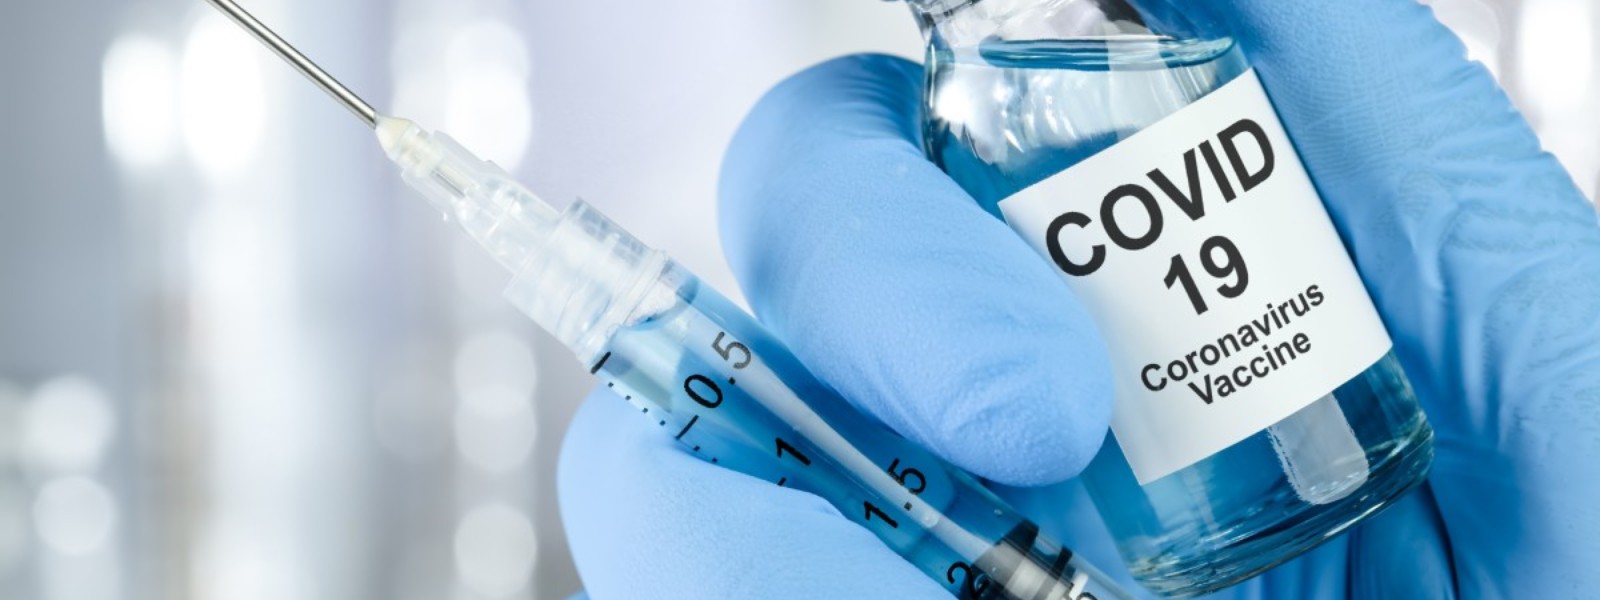 Myths about COVID-19 vaccines, cause for many to remain unvaccinated: SPC